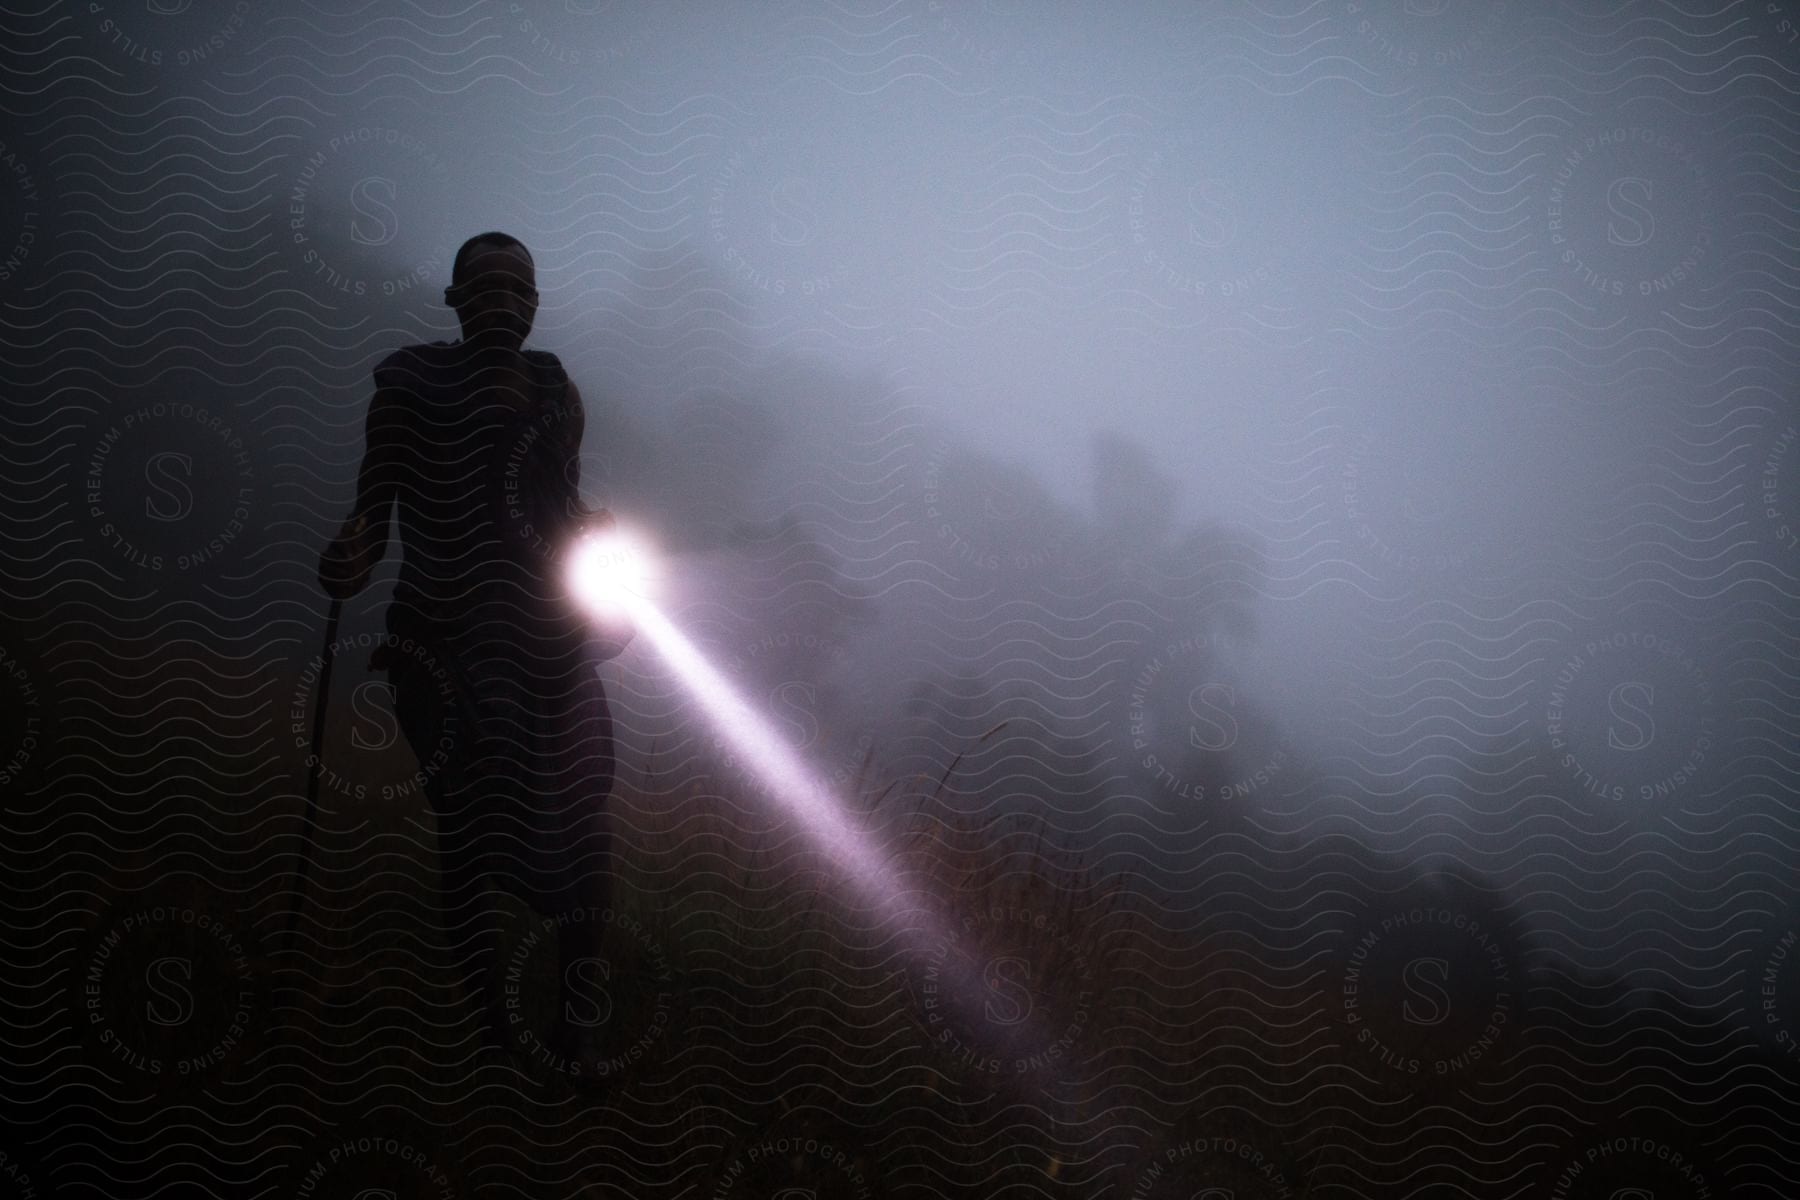 Silhouette of a person walking on a mountainside in thick fog at night holding a flashlight